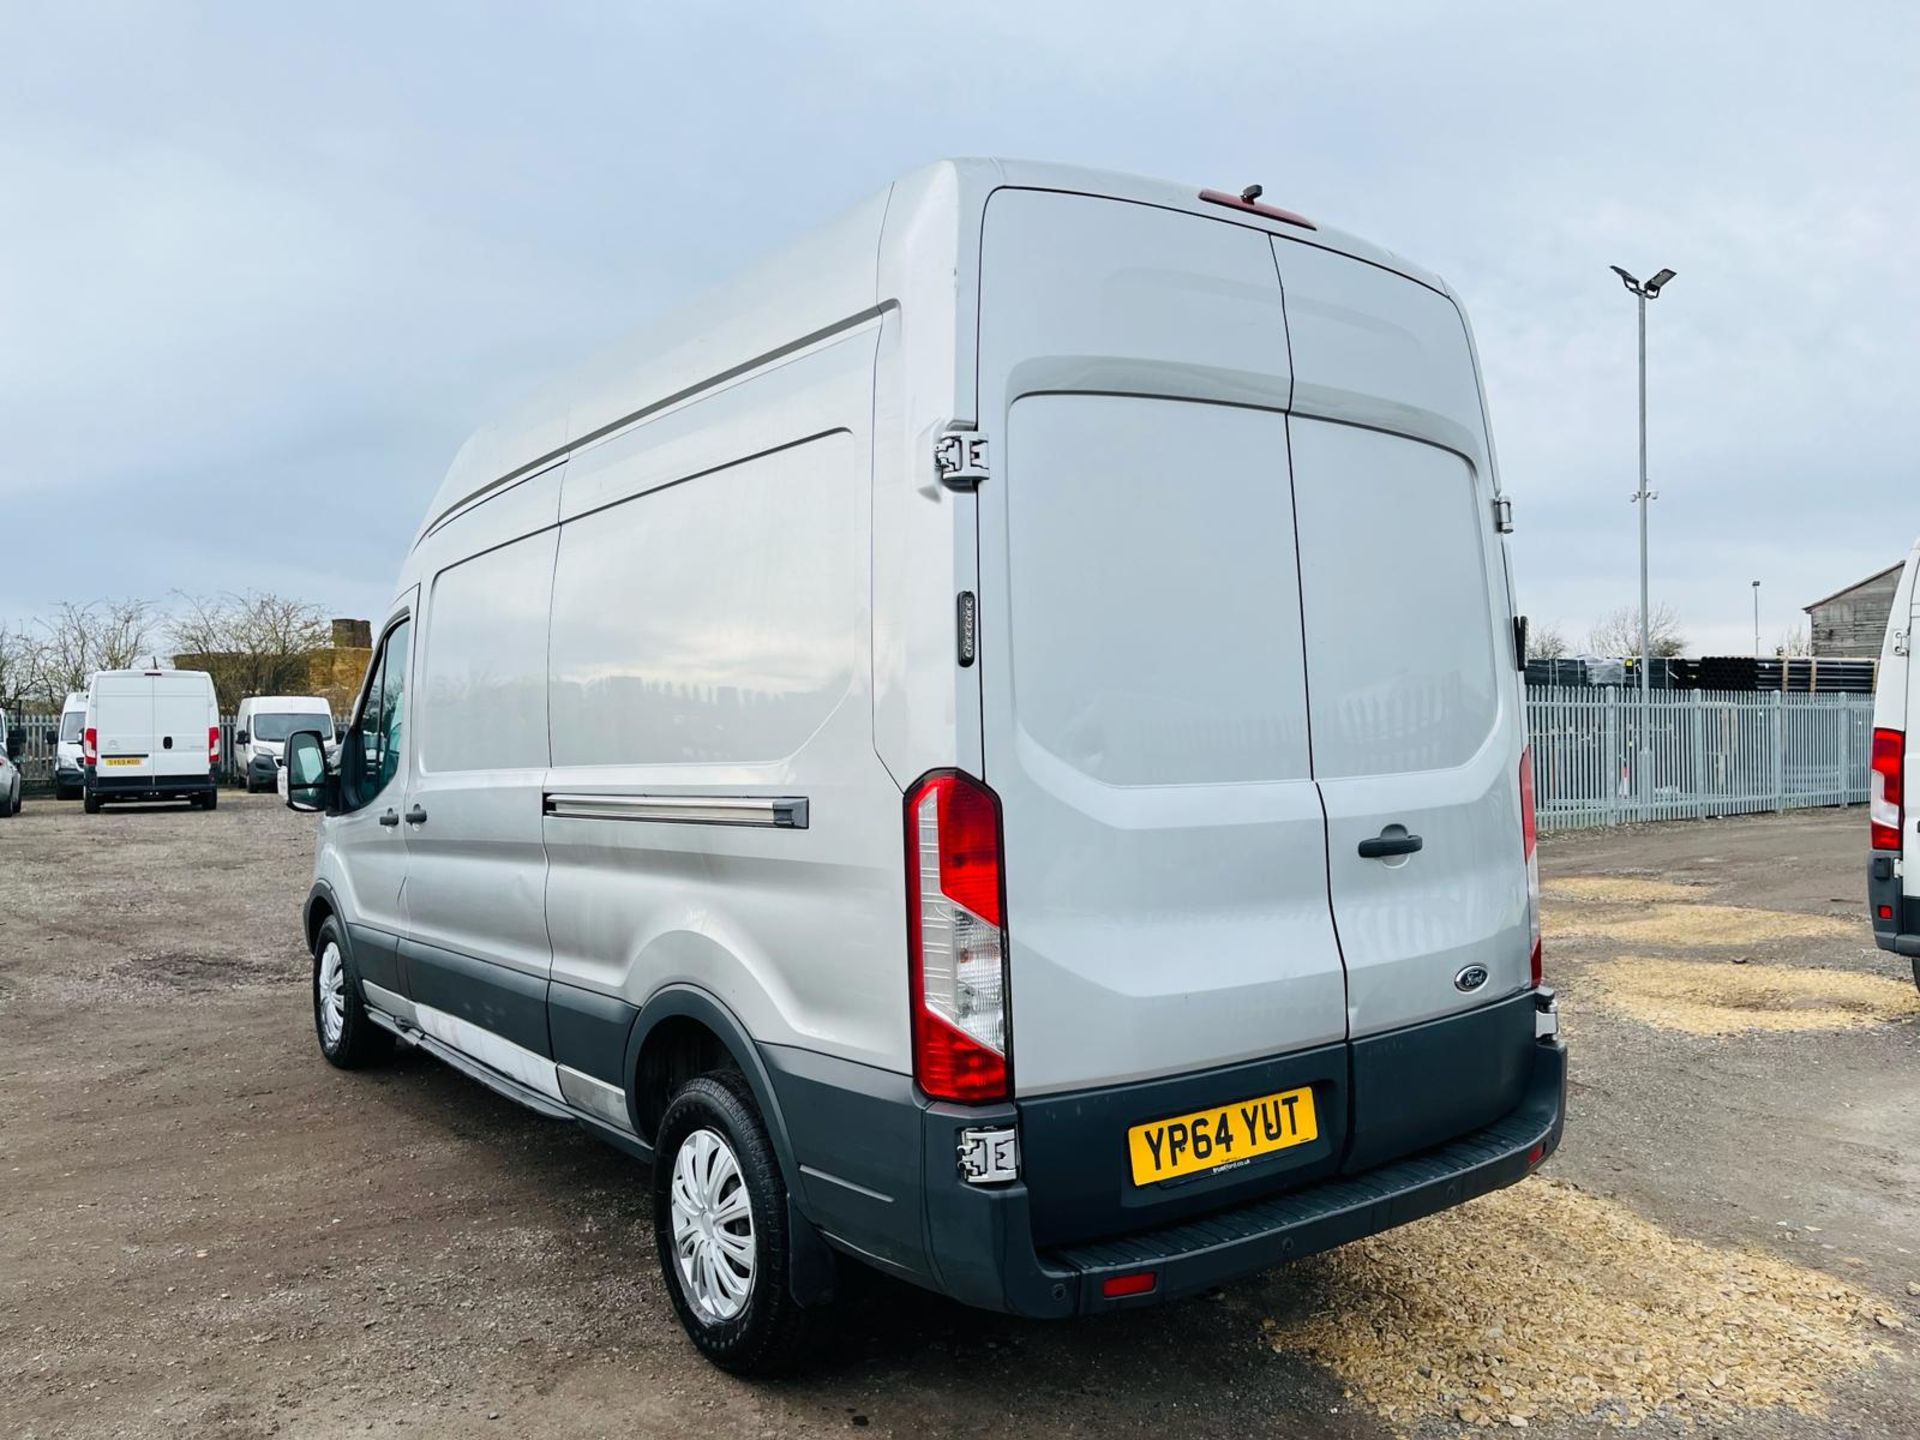 Ford Transit Trend 350 TDCI 125 2.2 L3 H3 2014 '64 Reg' - Parking sensors - Air Conditioning - Image 8 of 27